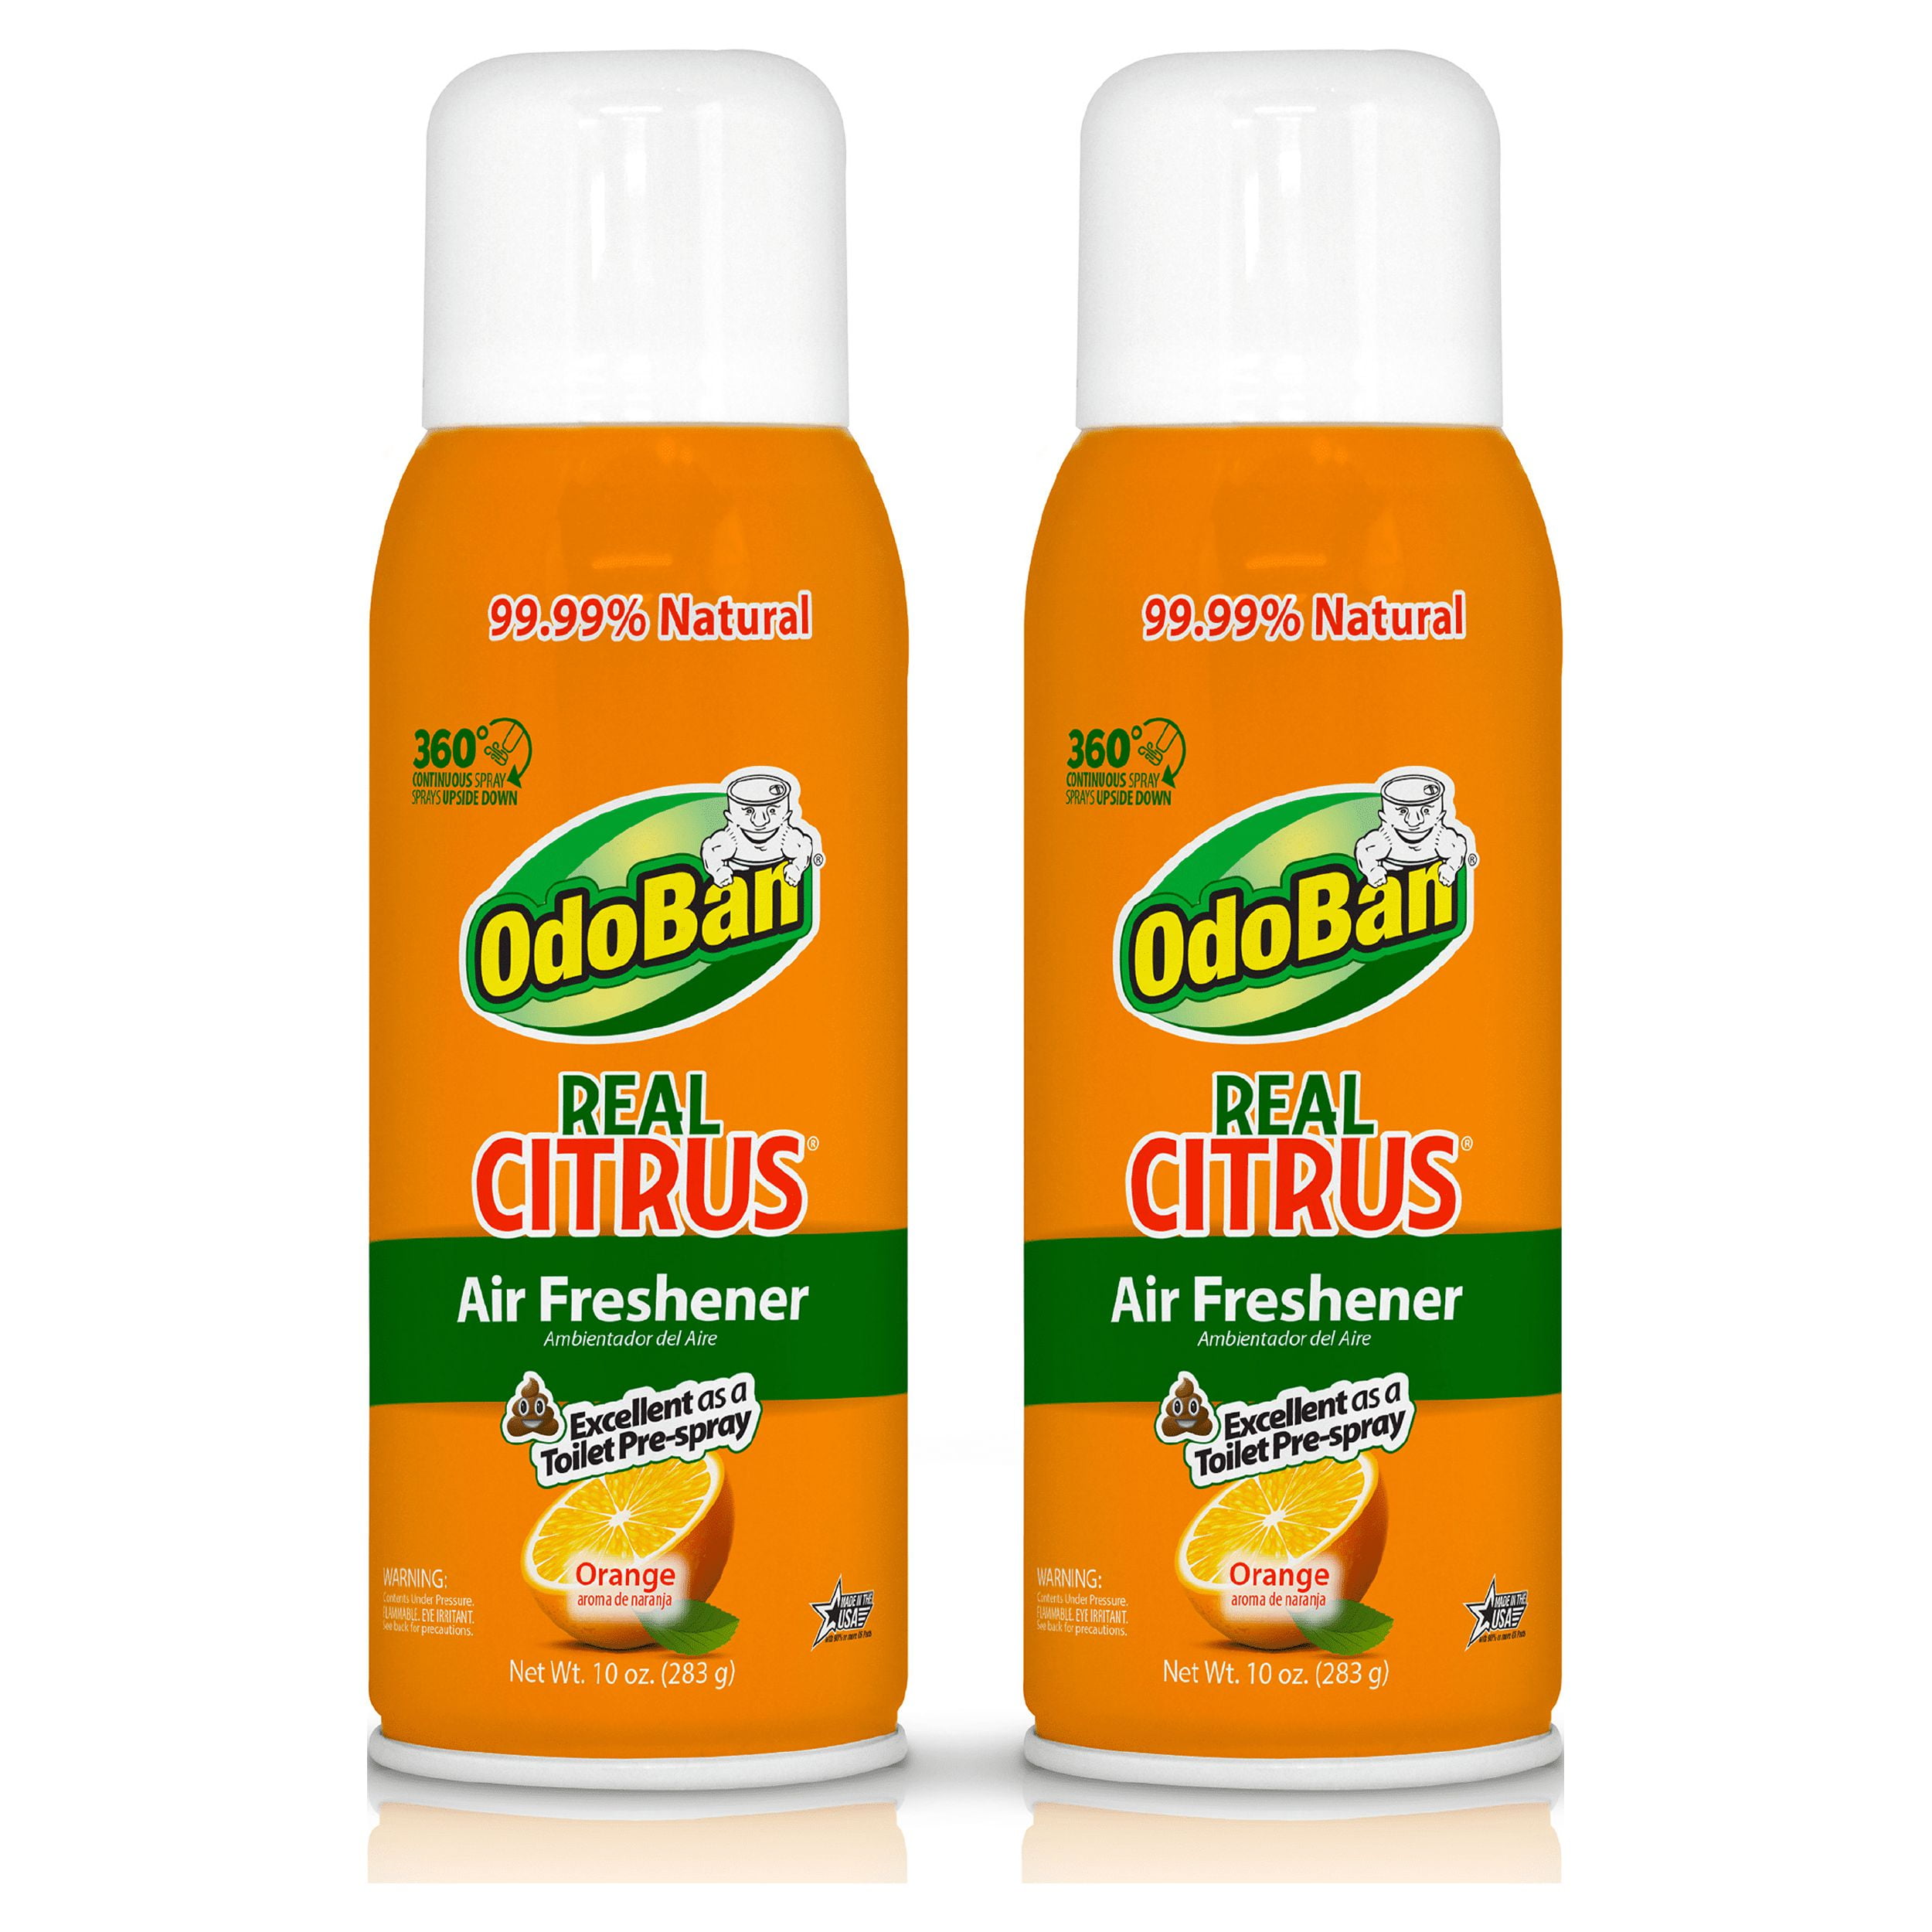 OdoBan Real Citrus Orange Air Freshener 360 Continuous Spray, 10 Ounce, 2 Pack, Size: 2-Pack